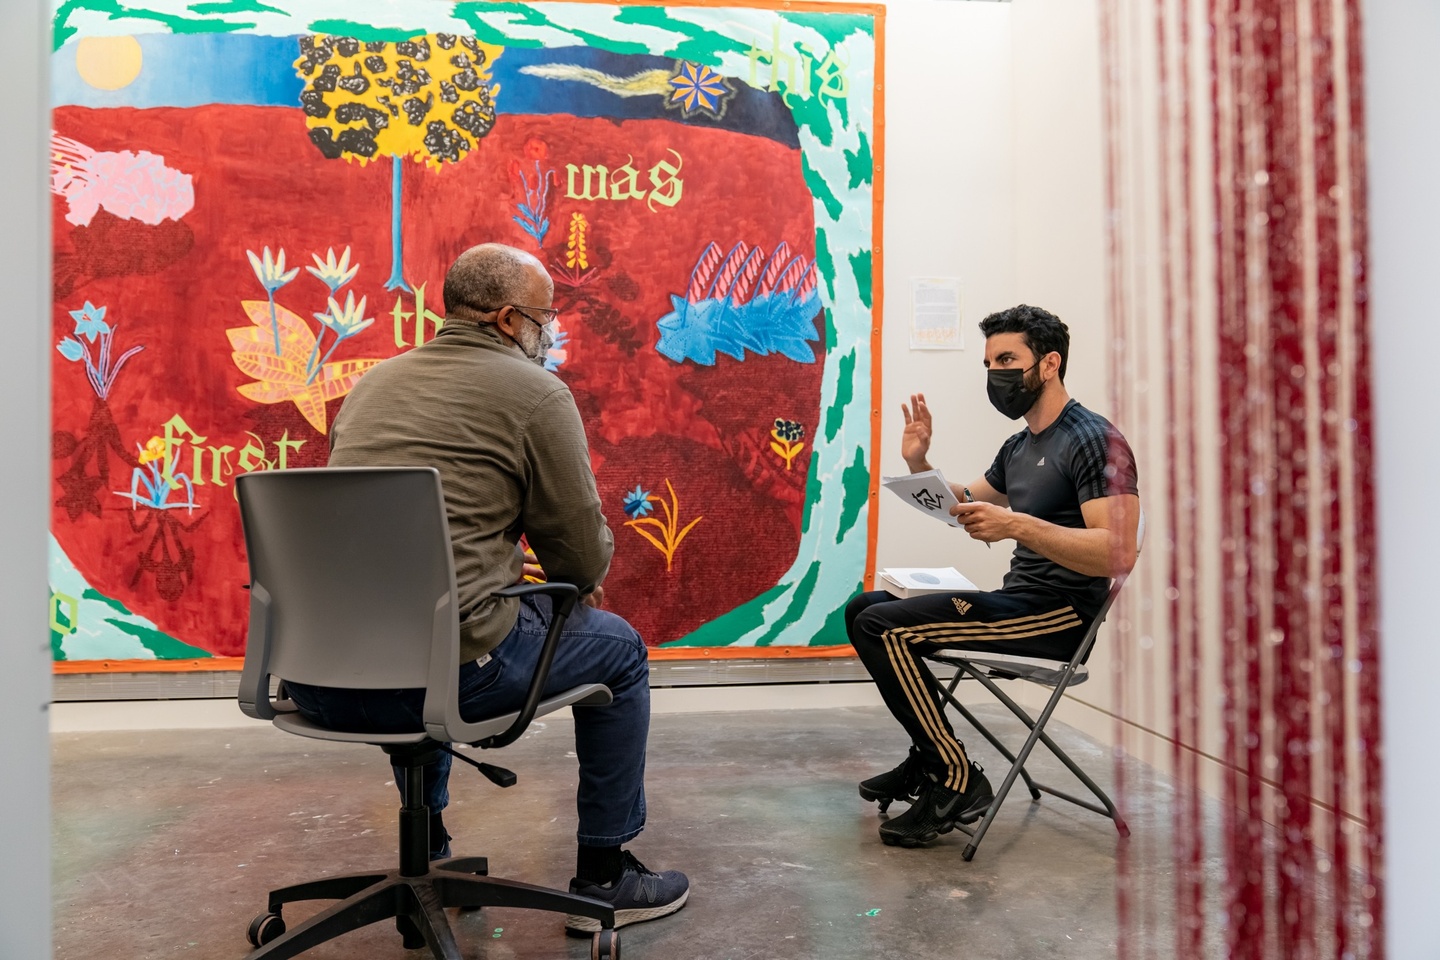 A student and faculty member sit in the student's studio, where a large, colorful artwork hangs on the wall.